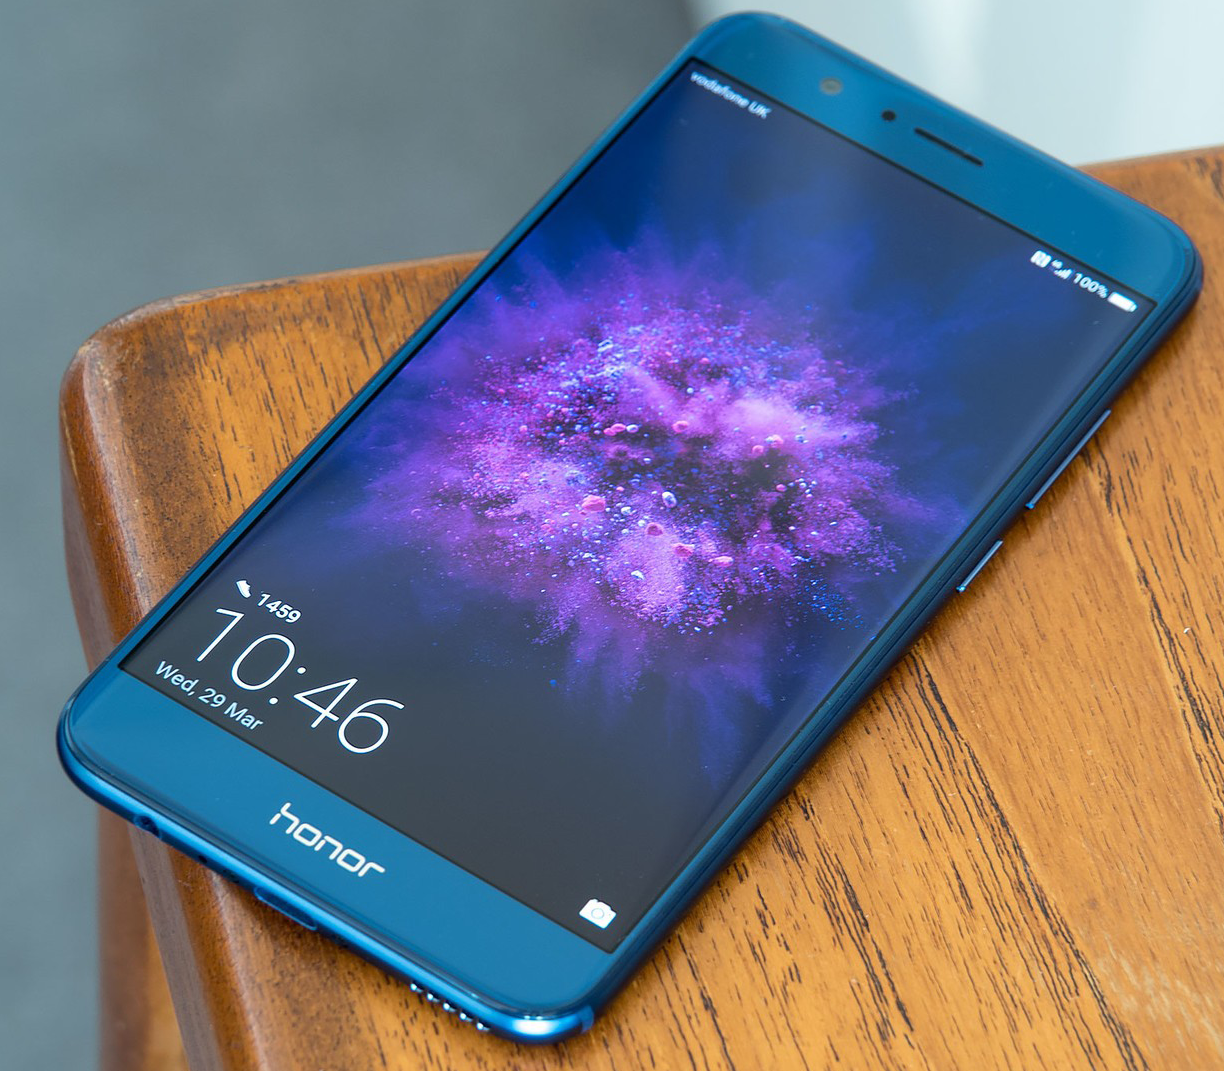 Huawei Honor 8 Pro Features, Specifications, Release Date, Price - Mykiweb